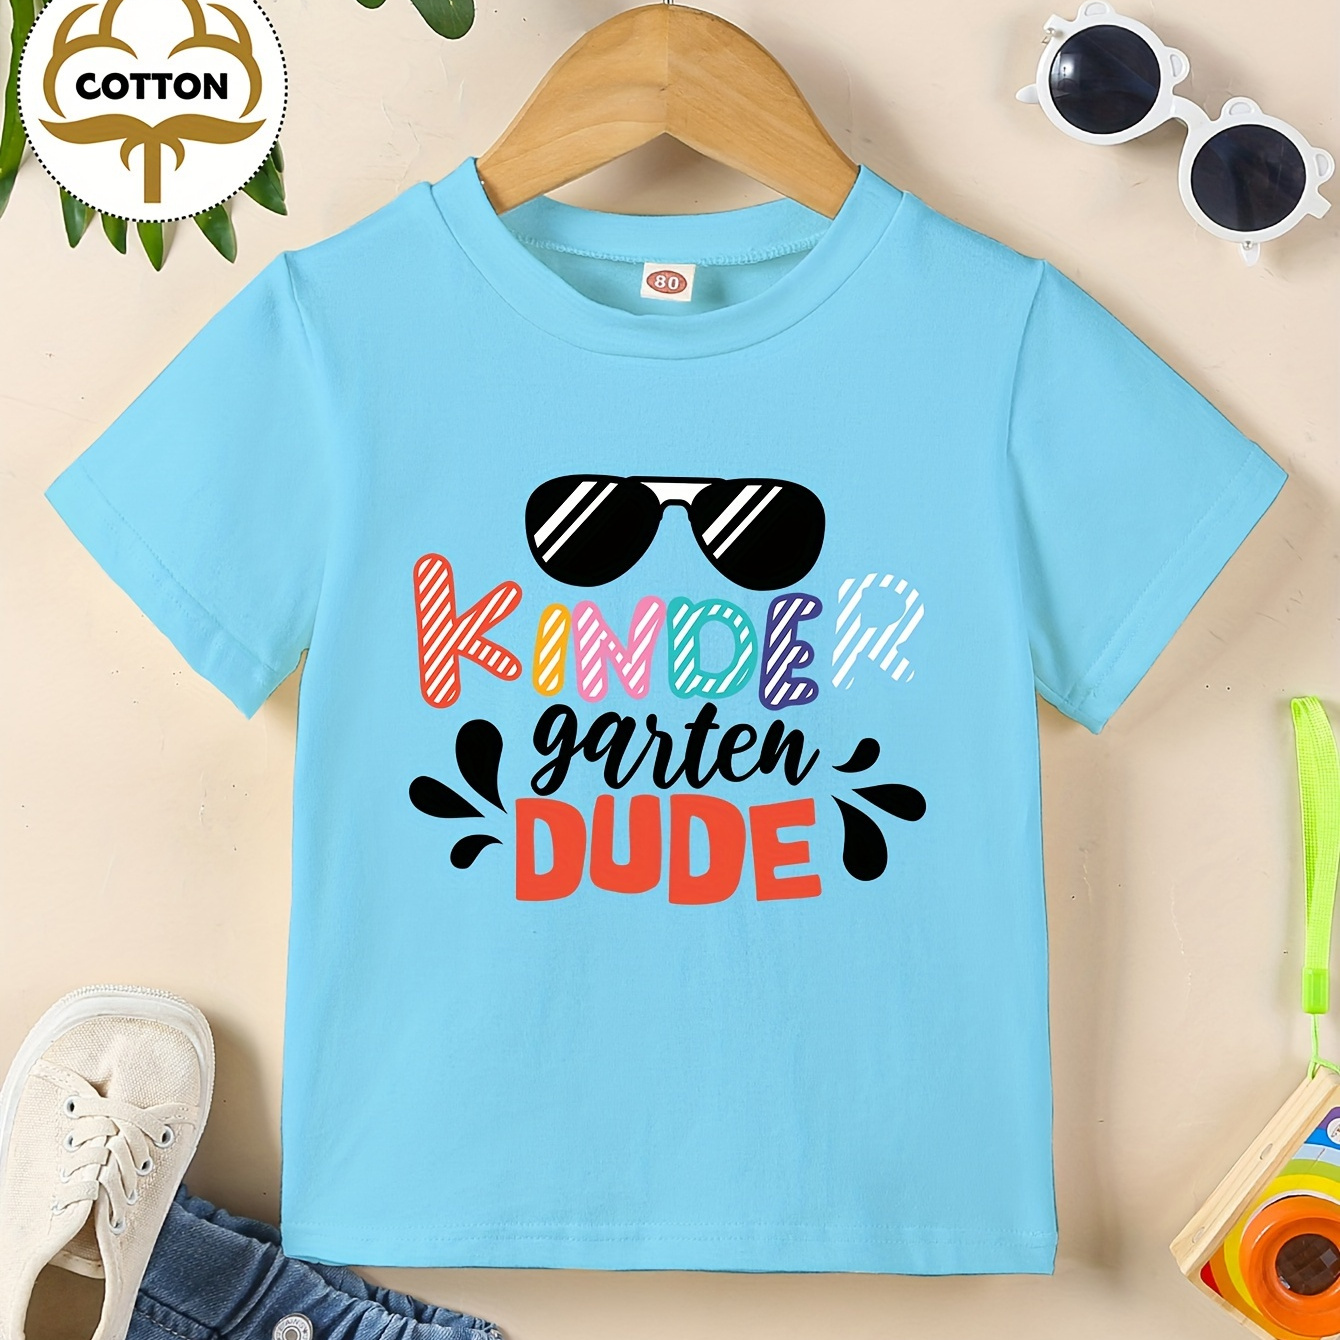 

Kindergarten Dude & Sunglasses Print Casual Short Sleeve T-shirt For Boys & Baby Boys, Cool Comfy Lightweight Versatile Tee Top, Boys Toddlers Summer Outfits Clothes